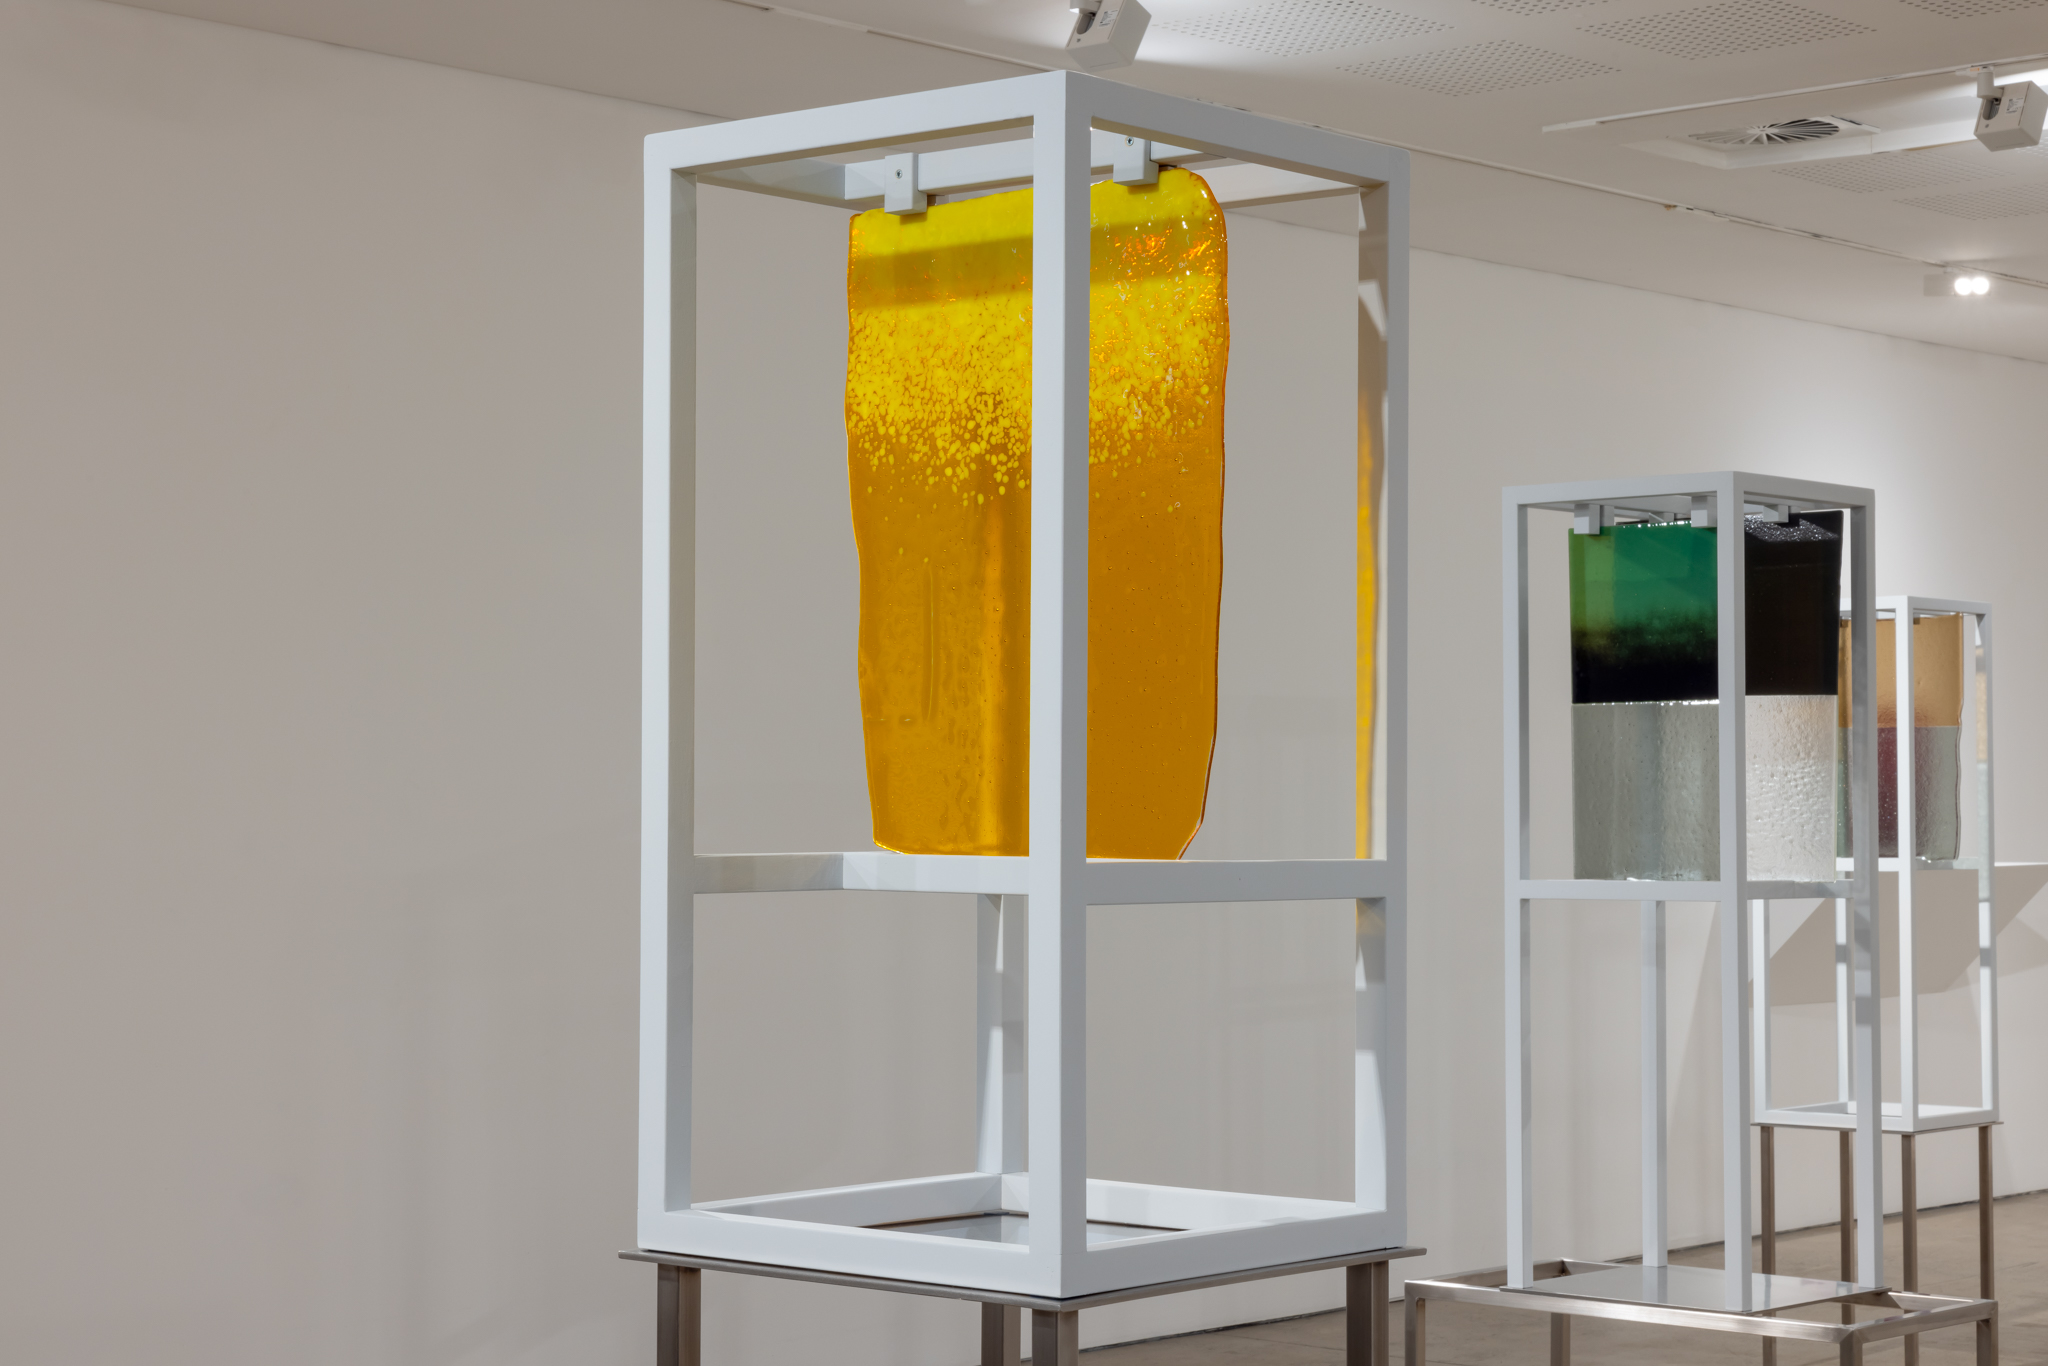 unswgalleries_glass_181022_credit_jacquiemanning-37.jpg